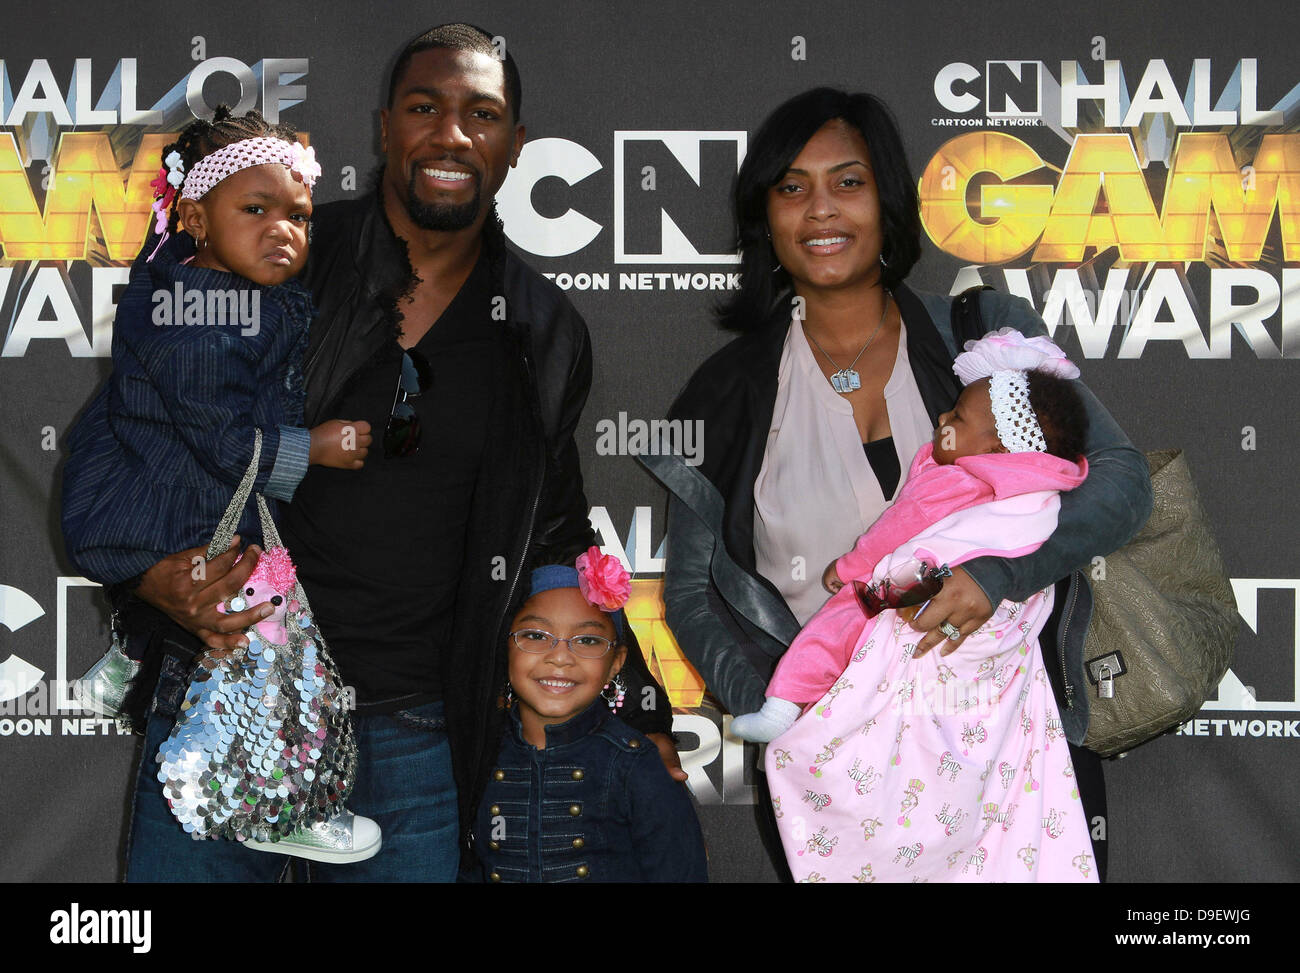 Greg Jennings of the Green Bay Packers and family Cartoon Network 'Hall of Game Awards' held at The Barker Hanger Santa Monica, California - 21.02.11 Stock Photo